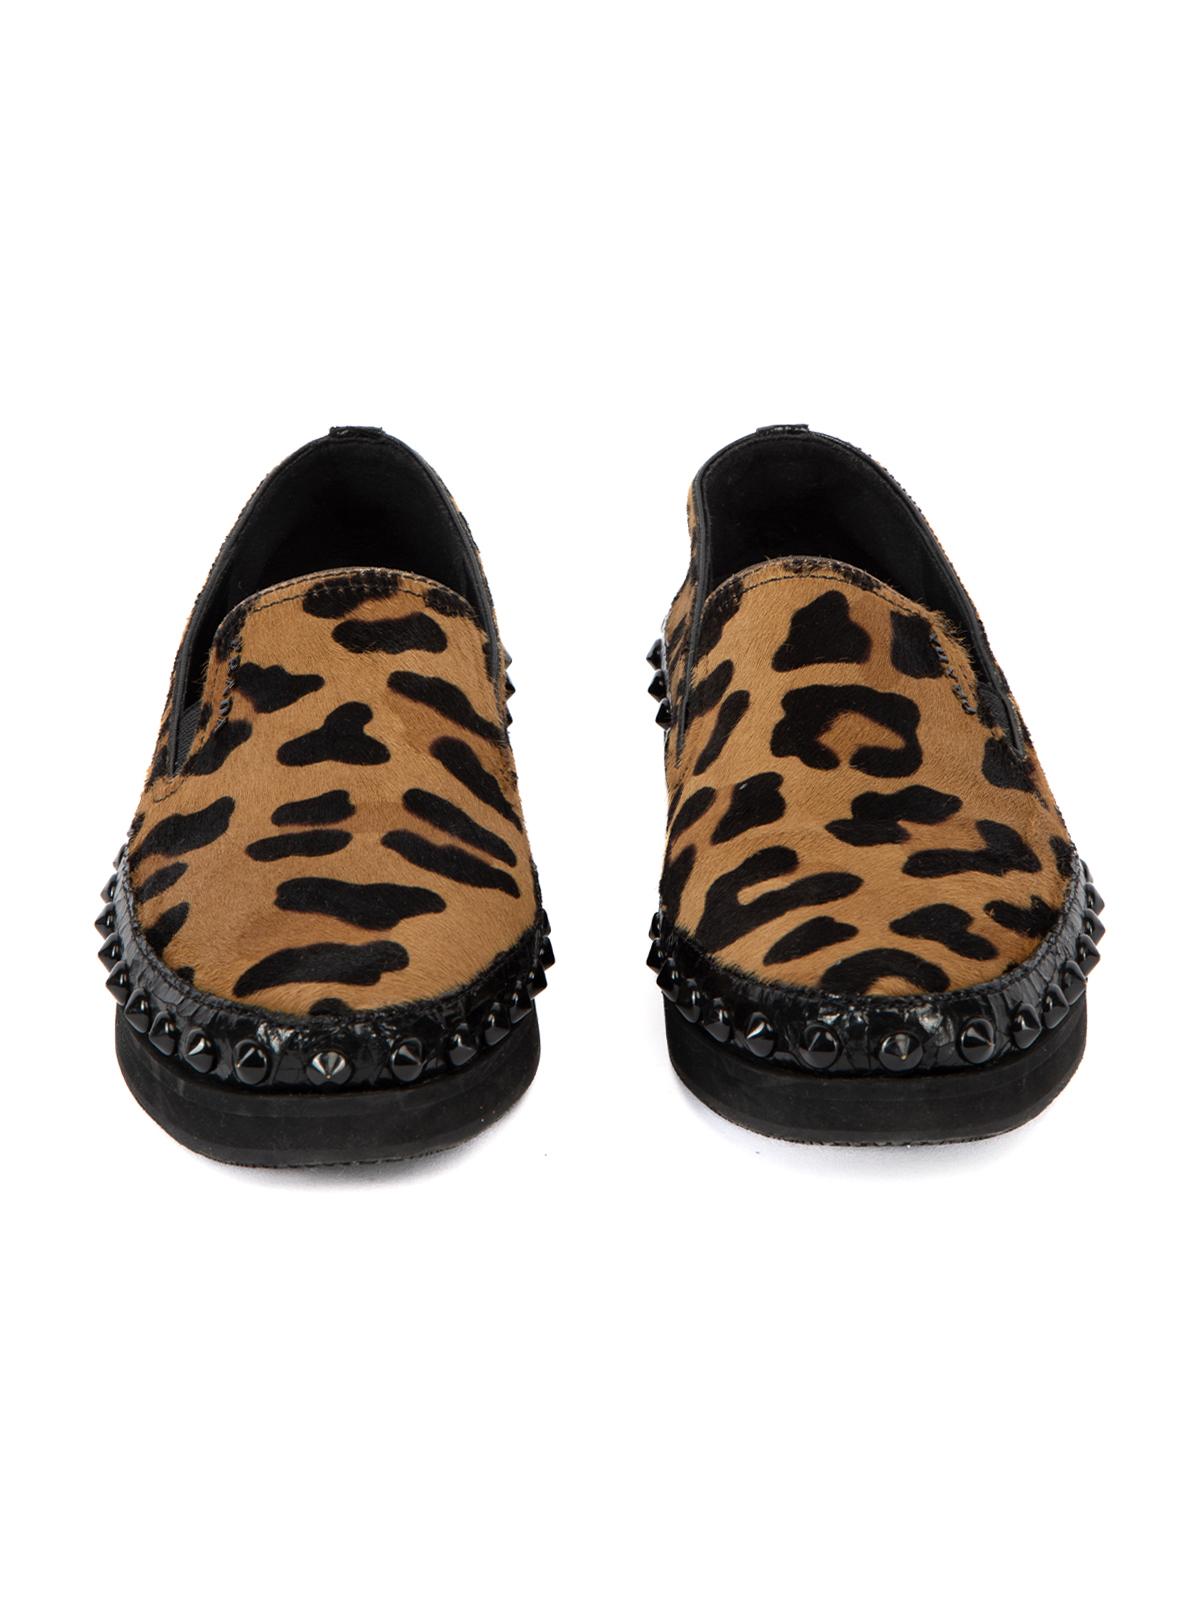 Pre-Loved Prada Women's Cheetah Loafers In Excellent Condition In London, GB